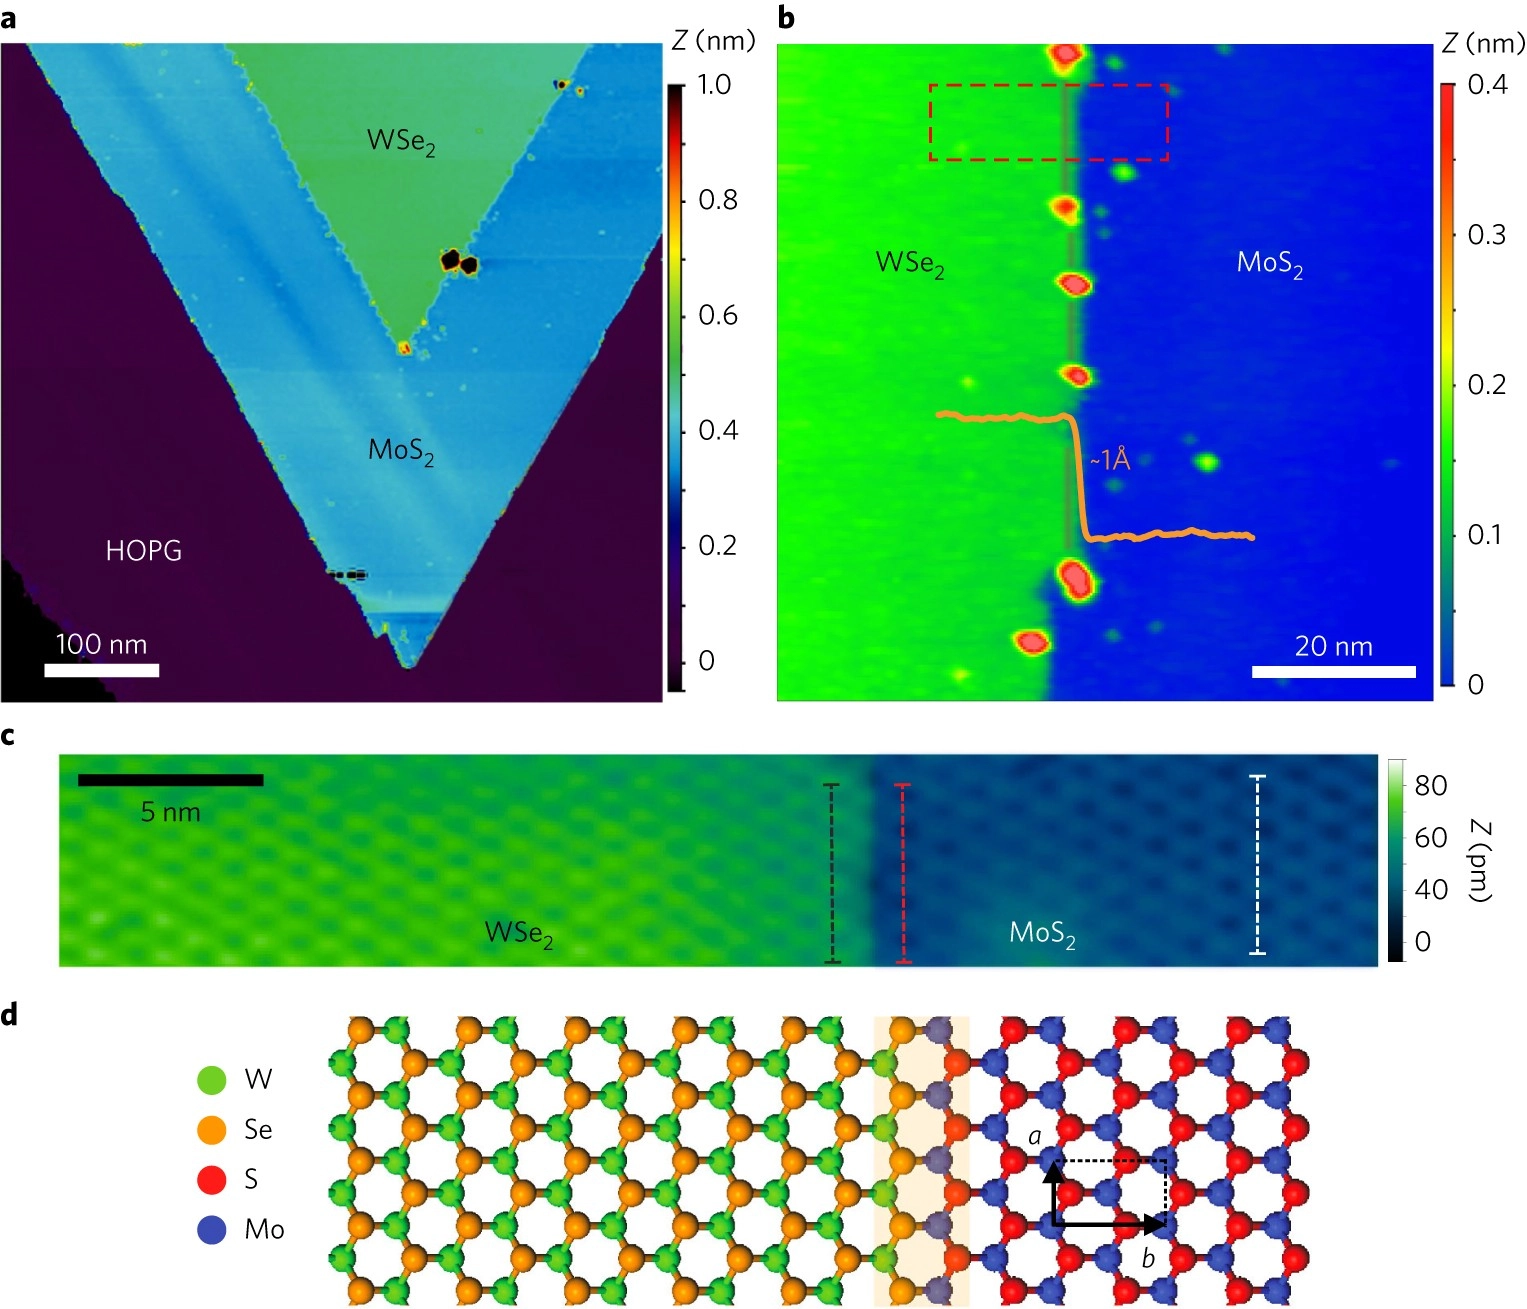 Strain distributions and their influence on electronic structures of WSe2–MoS2 laterally strained heterojunctions